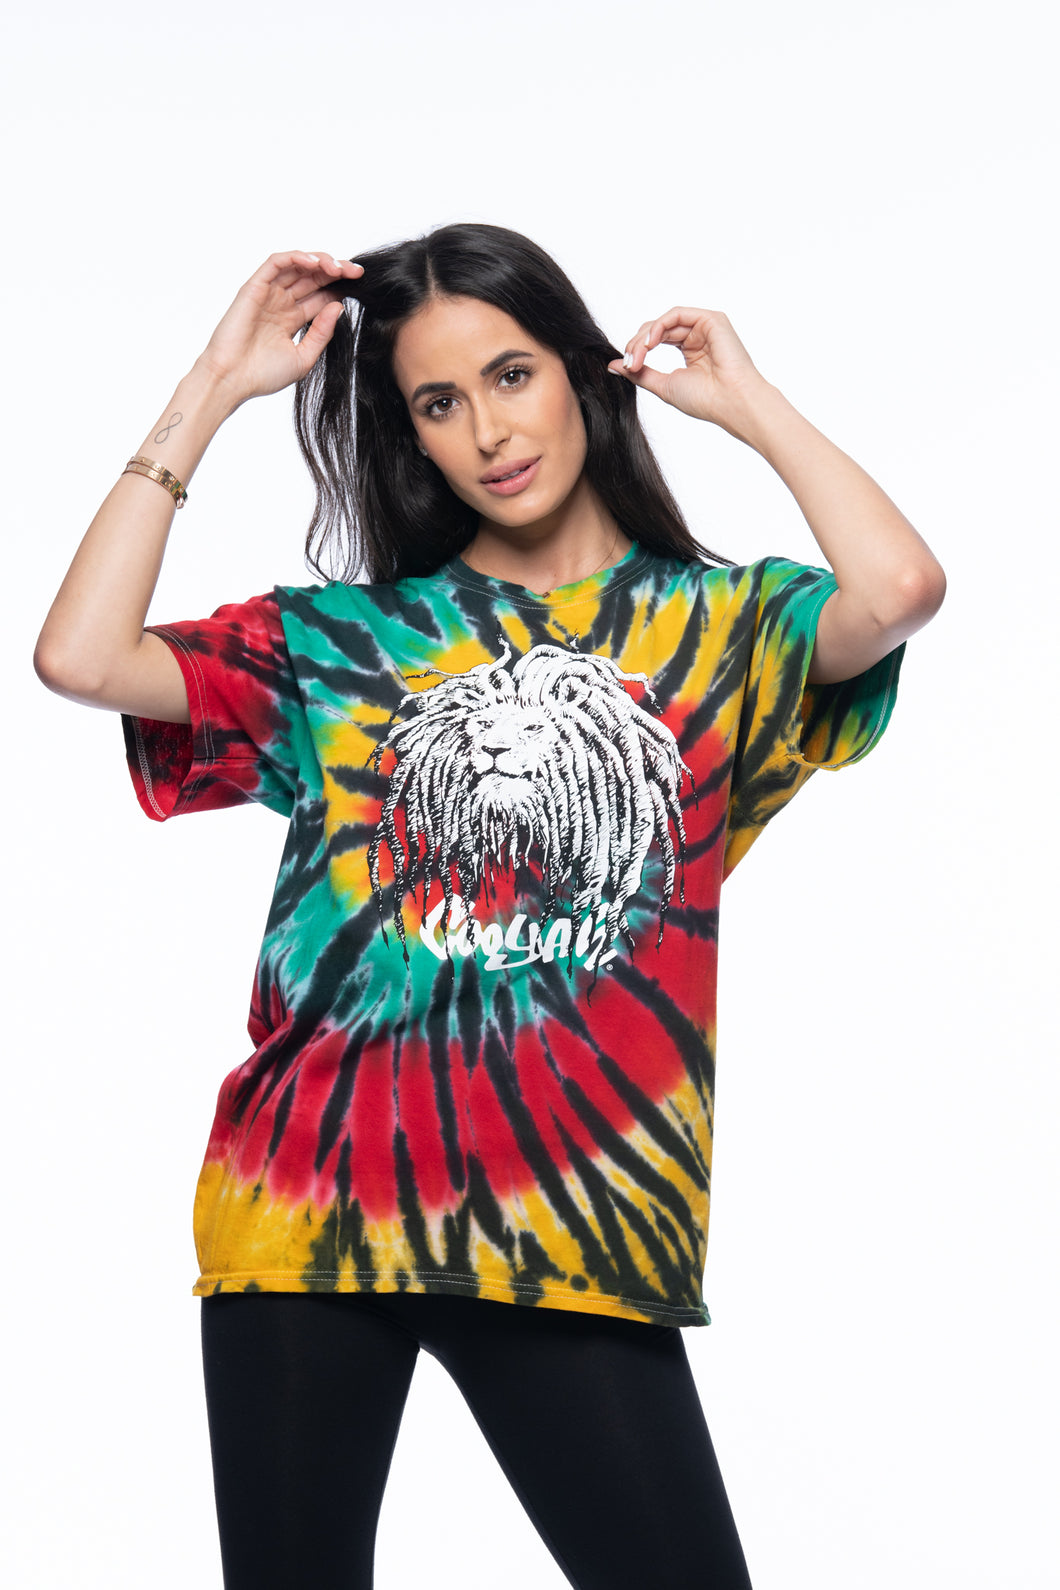 Cooyah Jamaica. Women's Tie-Dye shirt with Rasta Lion with dreads. Reggae rootswear clothing brand. Red, gold, and green. IRIE